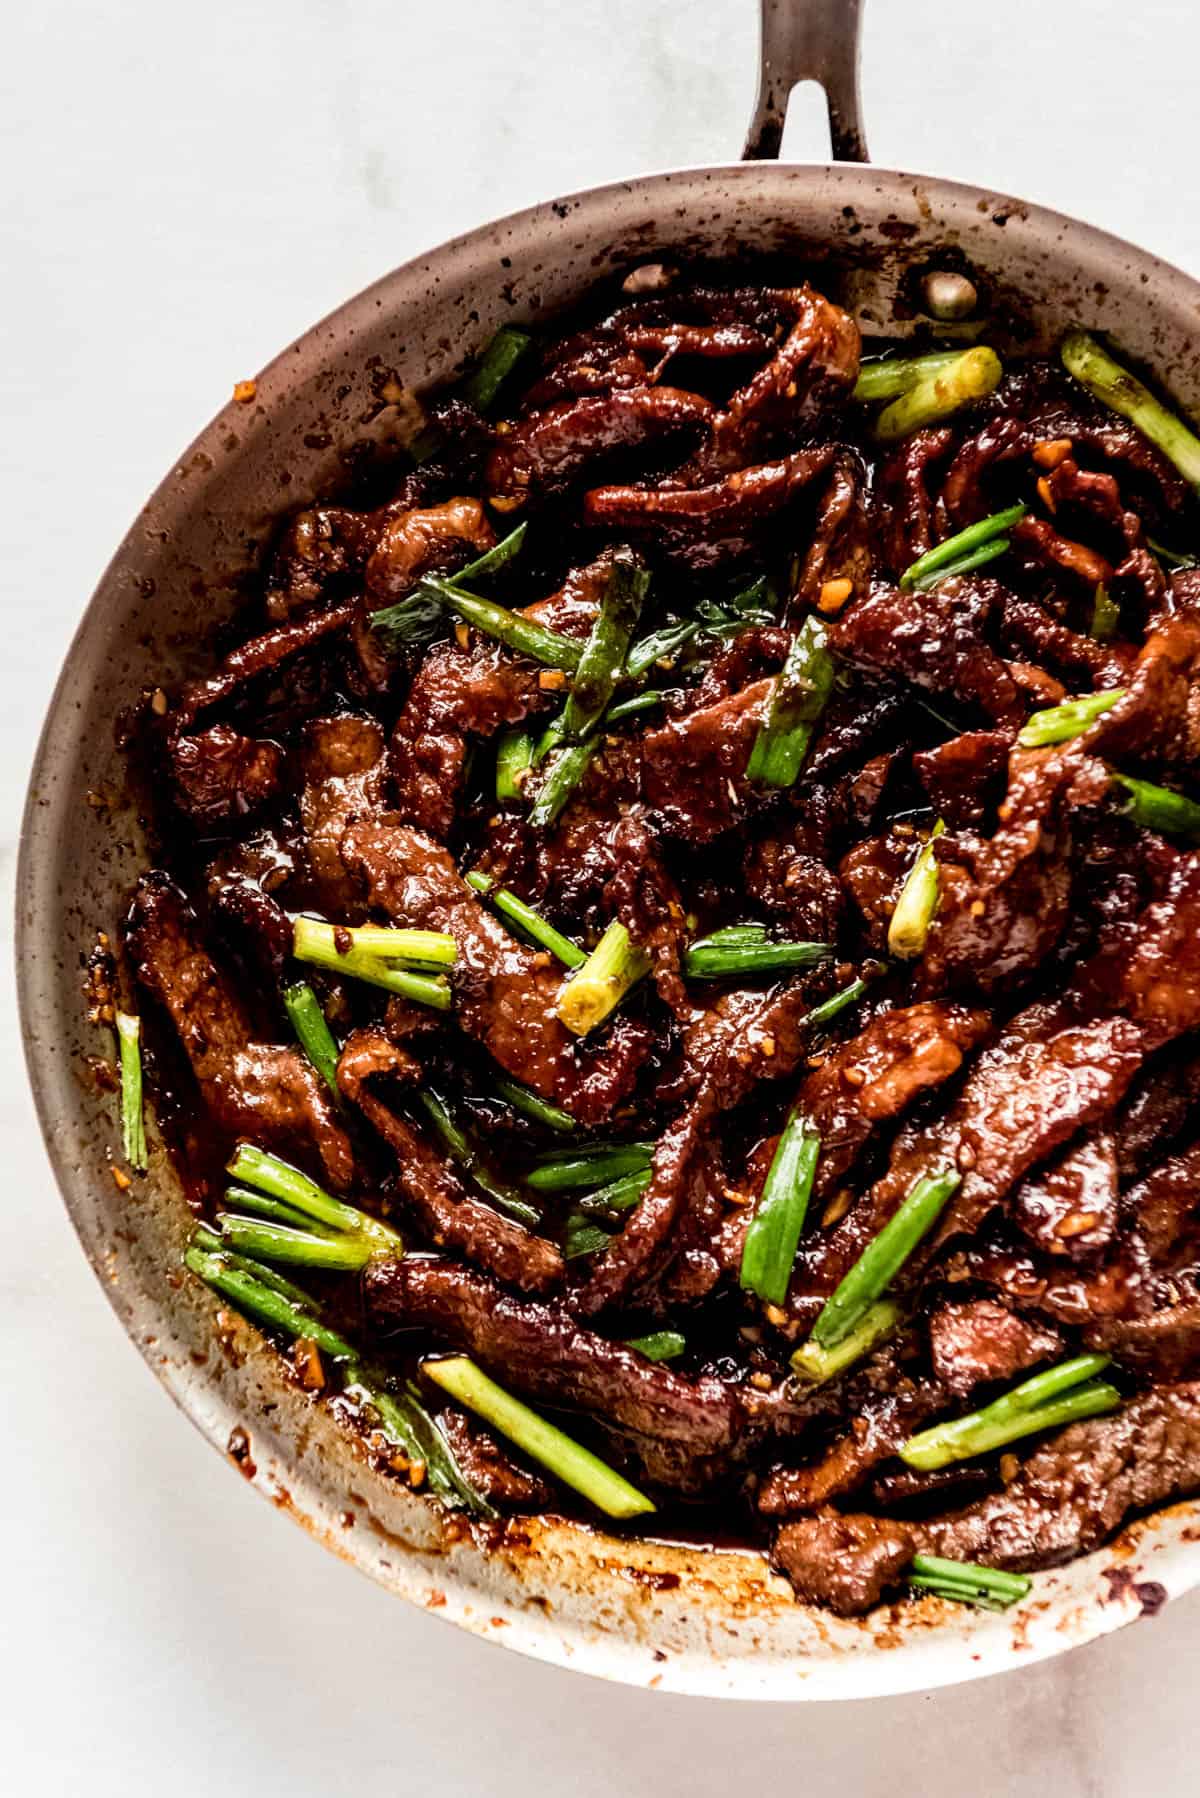 Mongolian Beef Recipe in pan cooked with sauce and green onions roughly chopped and sprinkled on top of beef.